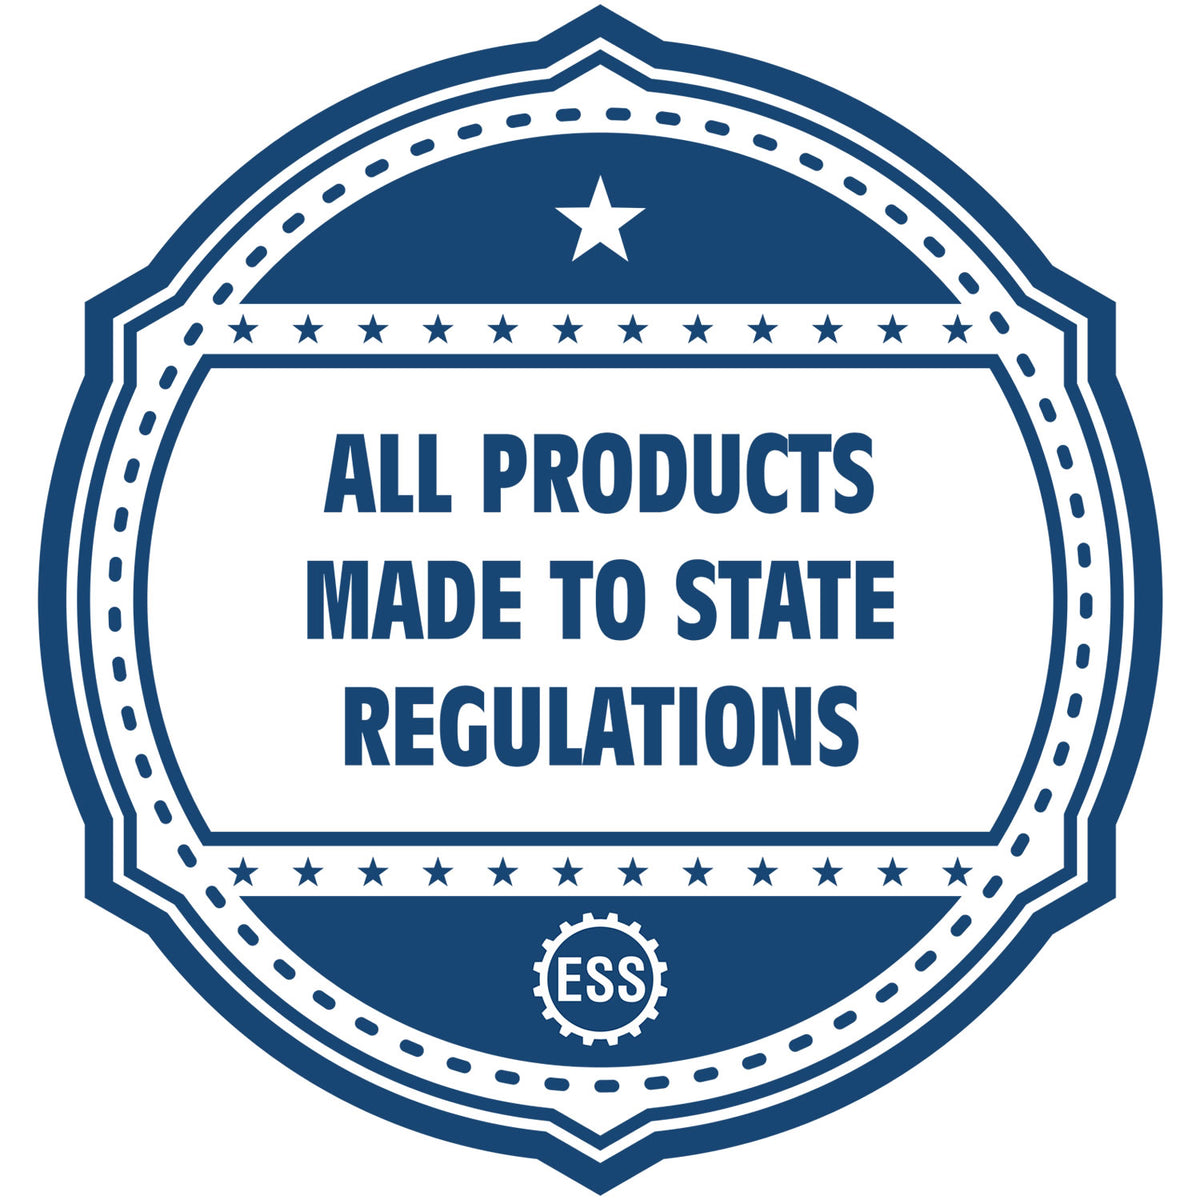 An icon or badge element for the MaxLight Premium Pre-Inked Connecticut State Seal Notarial Stamp showing that this product is made in compliance with state regulations.